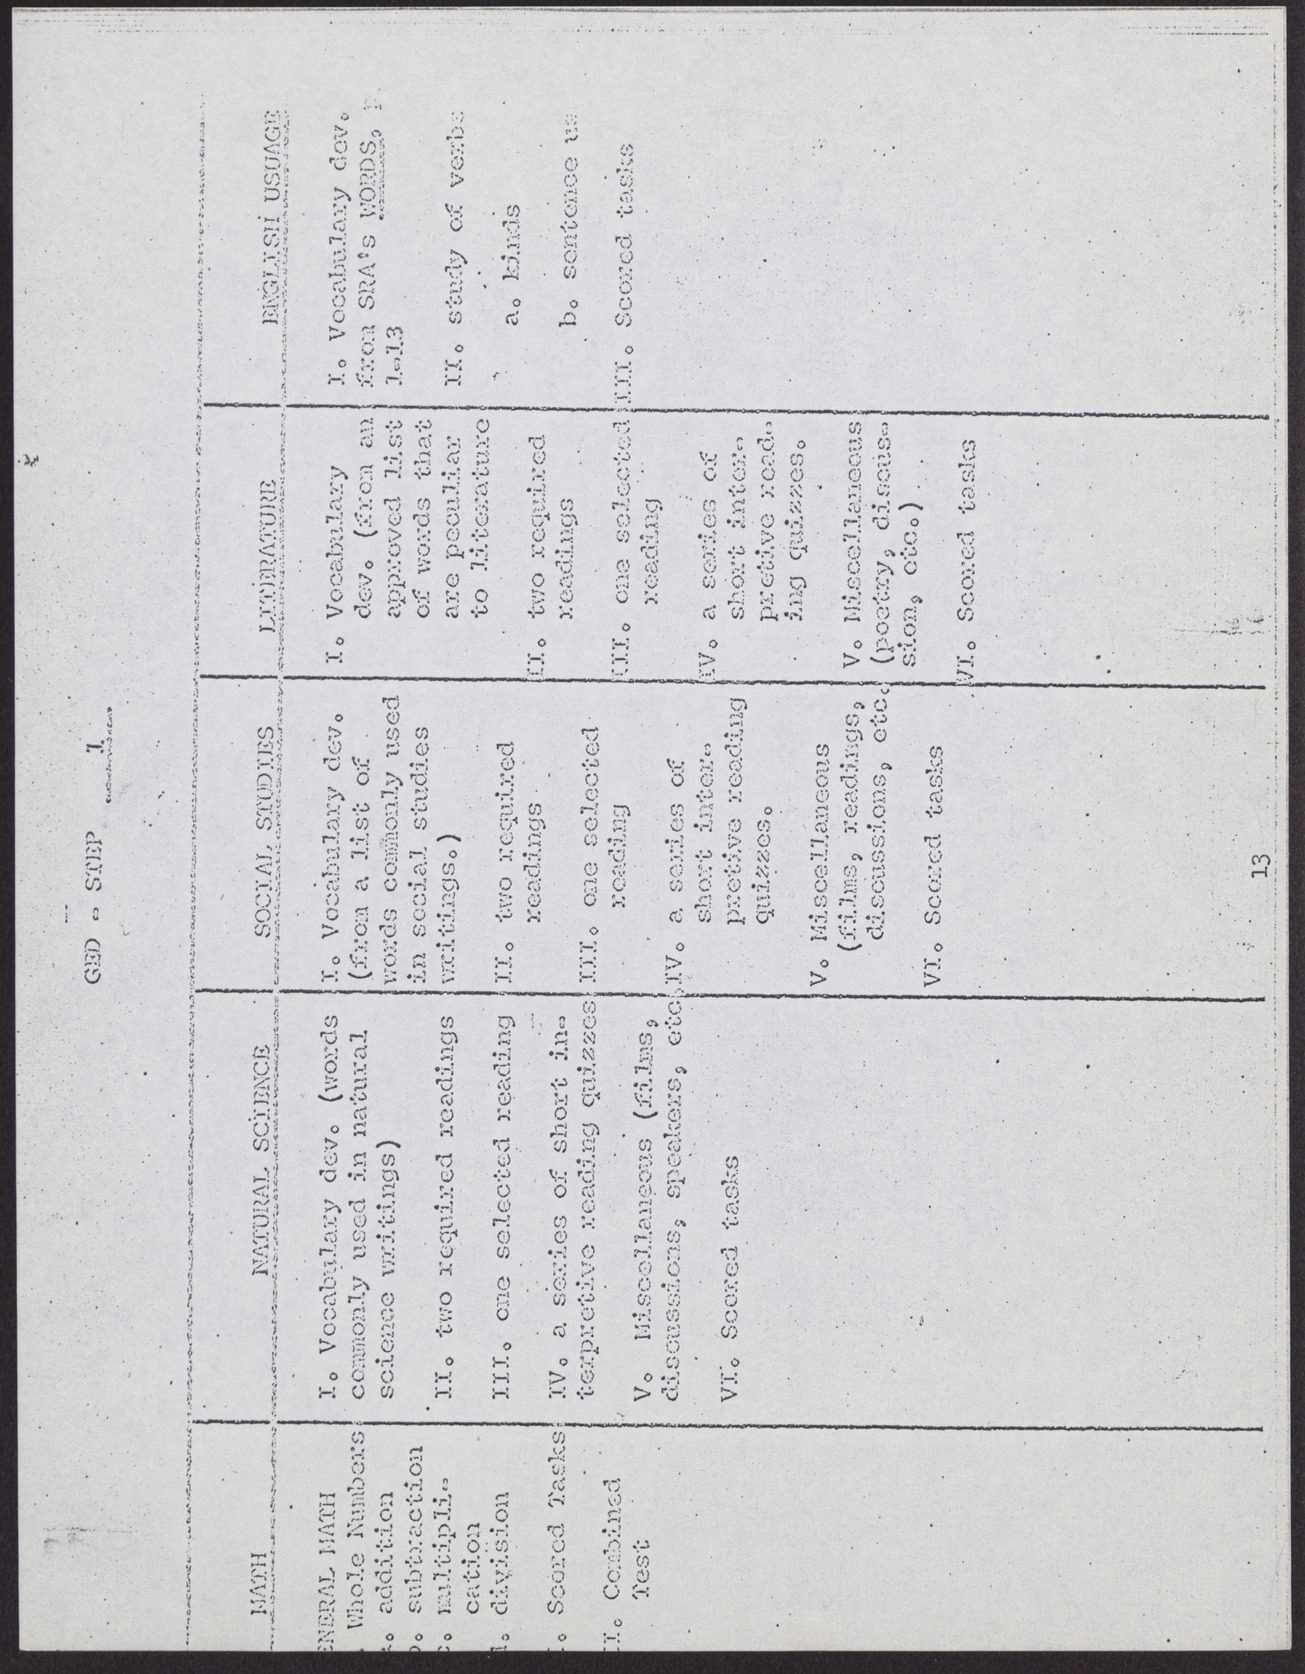 Proposal to the Clark County, Nevada Concentrated Employment Program (21 pages, missing some pages/sections listed in its table of contents), July 2, 1968, page 17